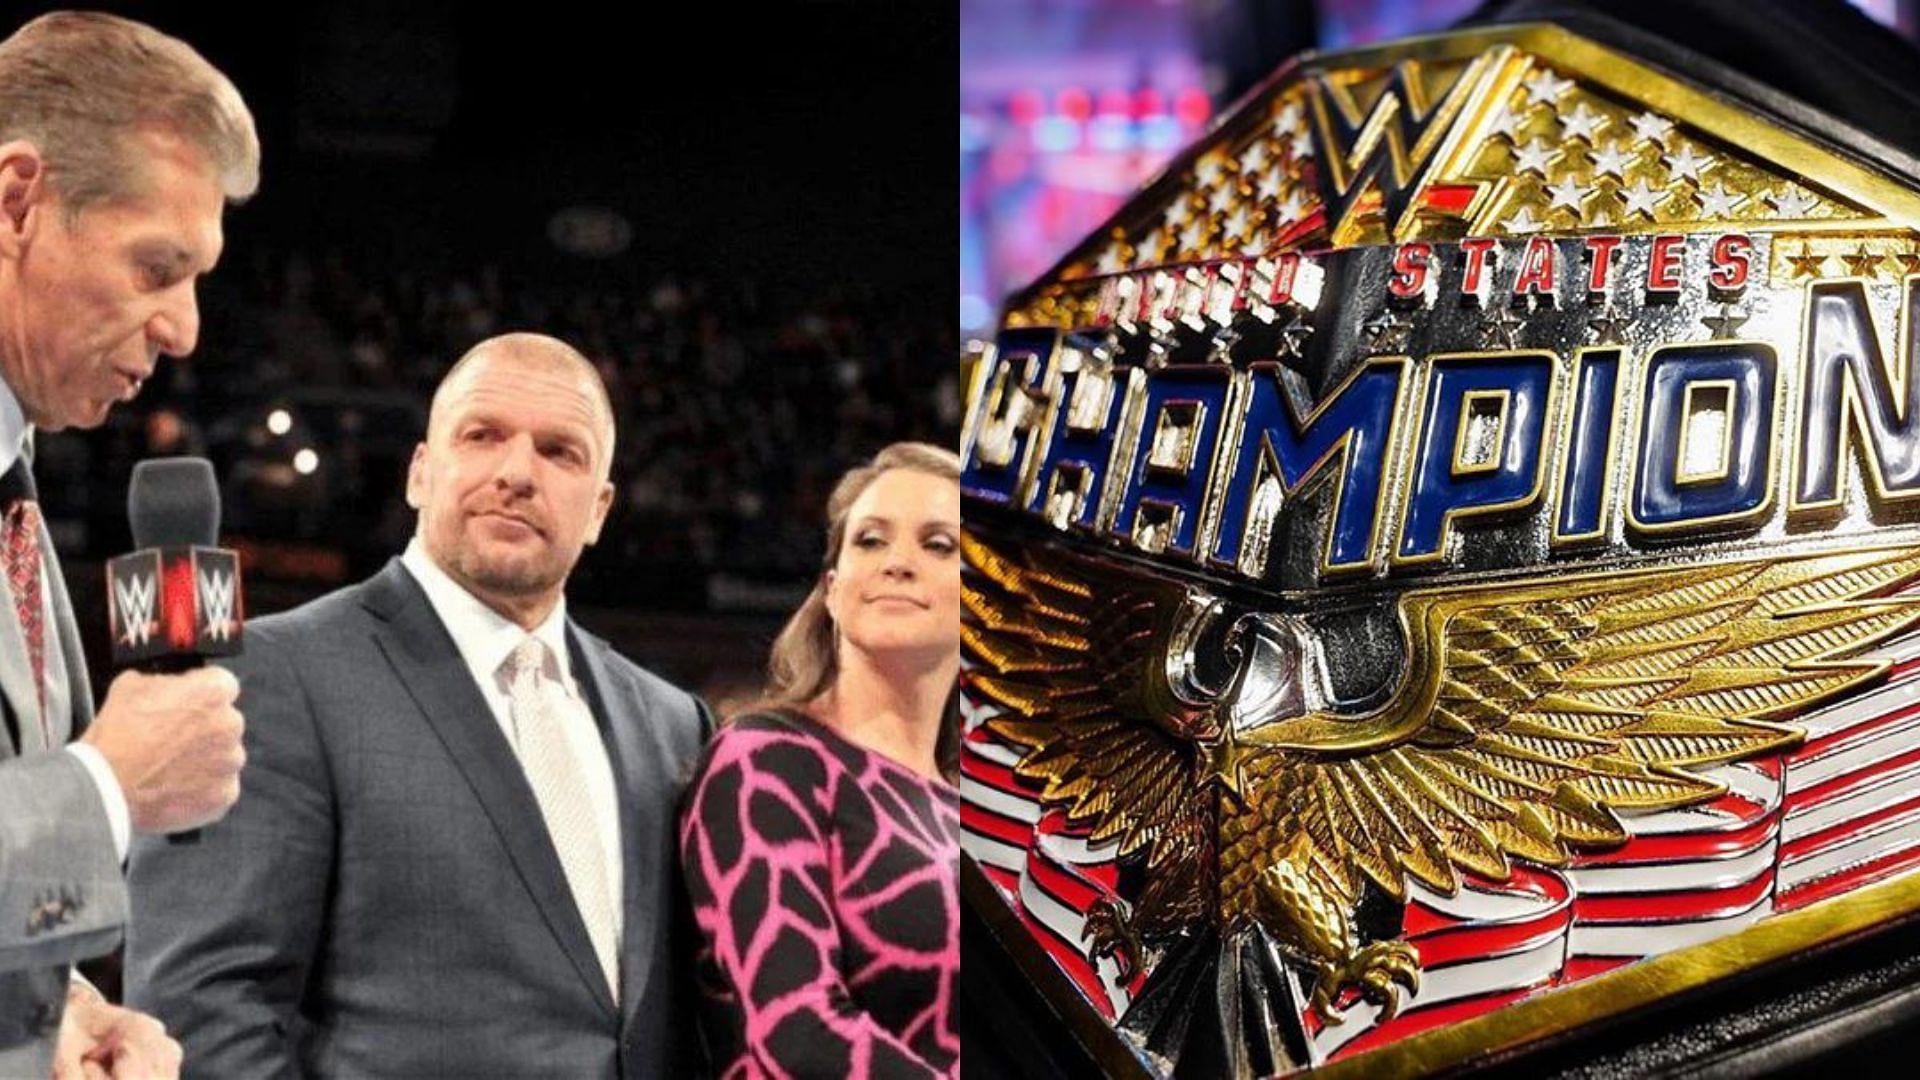 A former WWE US Champion has opened up about his release